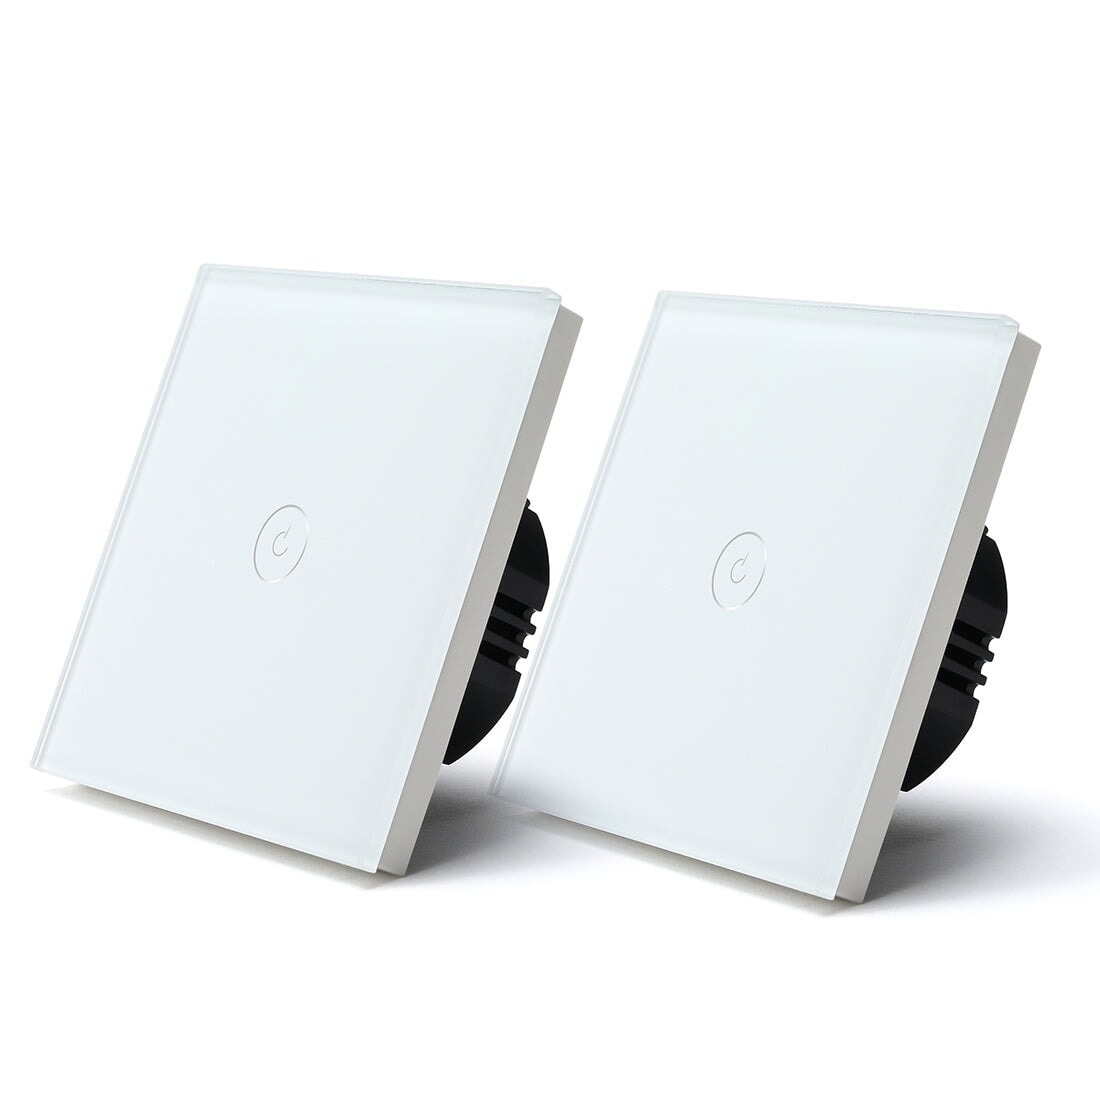 Bseed Smart Wifi Touch Switch 1 Gang 1/2/3 Way Wall Plates & Covers Bseedswitch White 2Pcs/Pack 